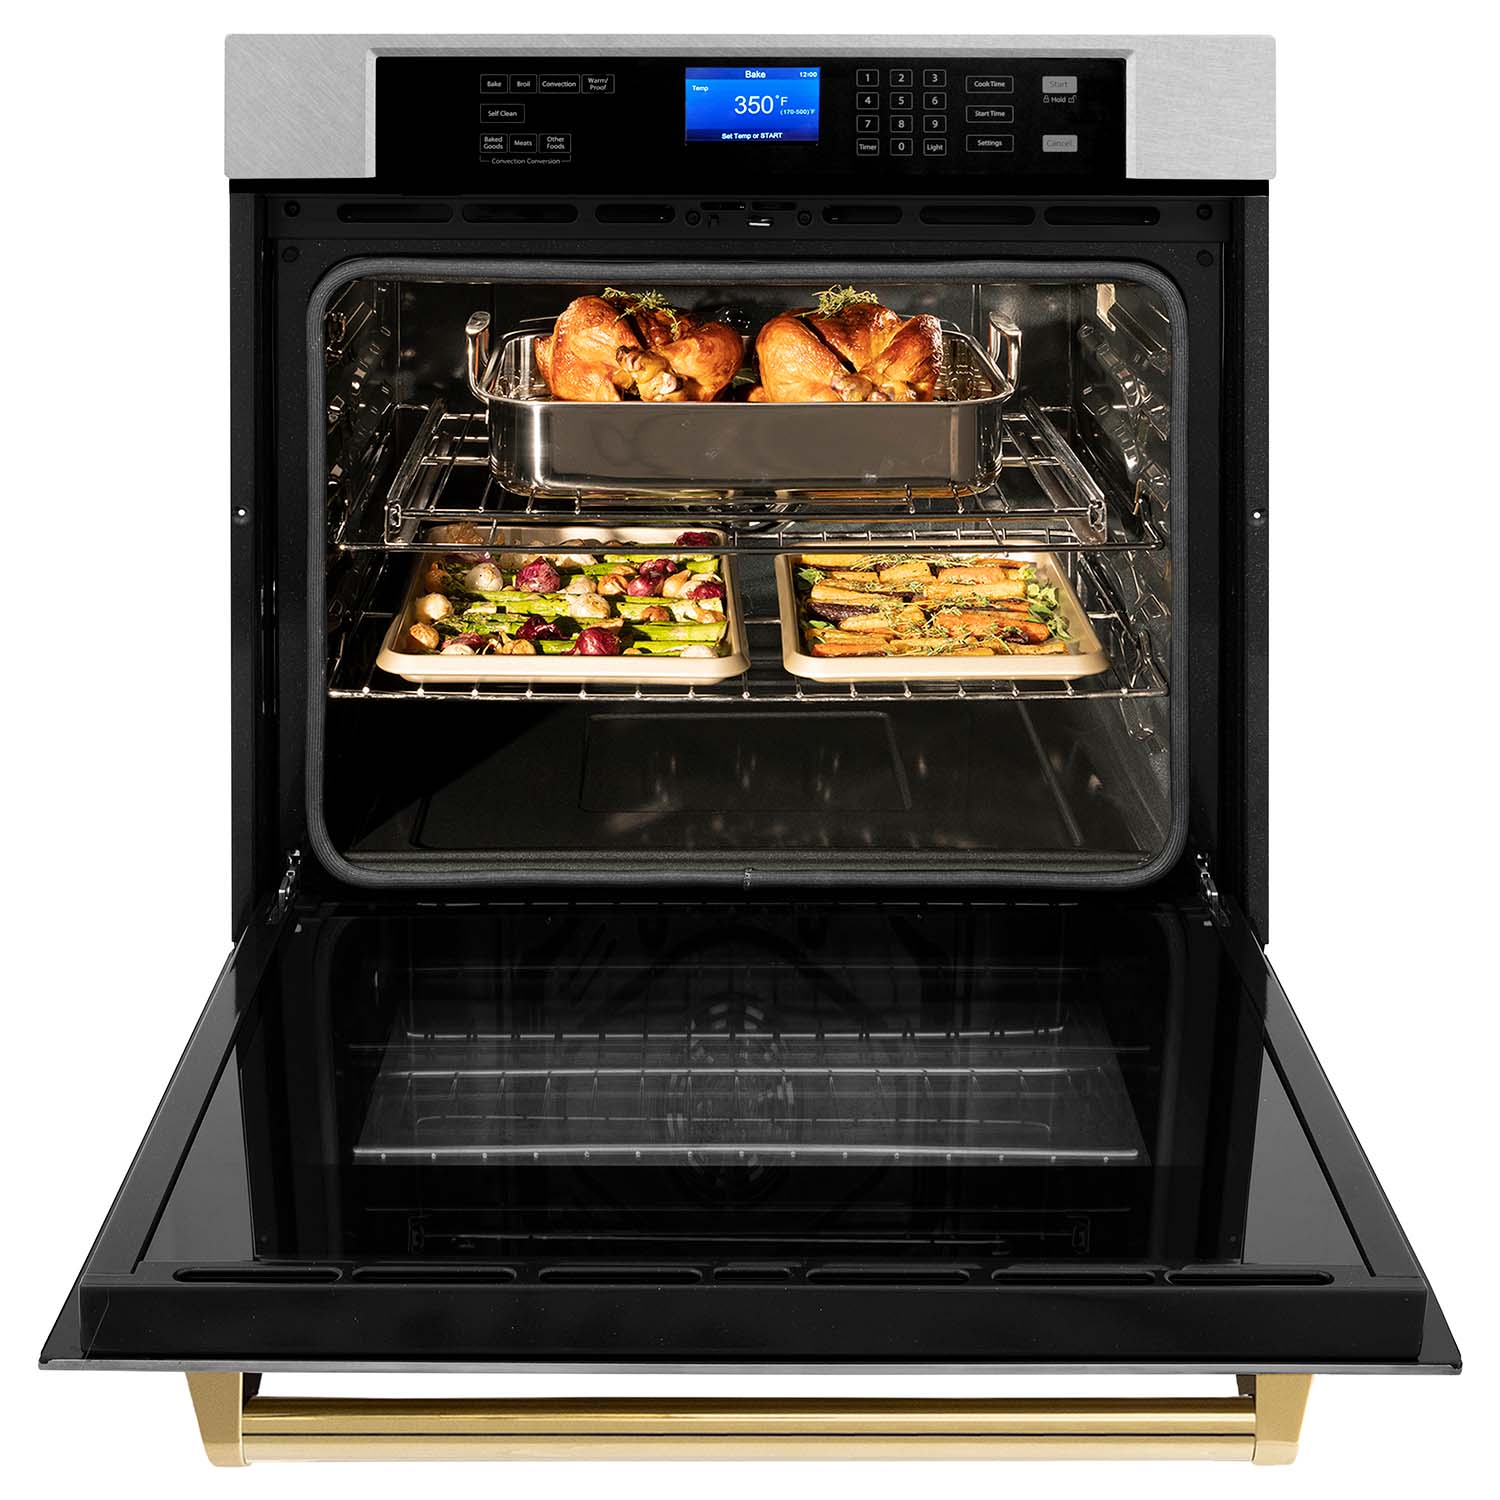 ZLINE 30" Autograph Edition Electric Single Wall Oven - Fingerprint Resistant Stainless Steel with Accents, Self Clean, True Convection